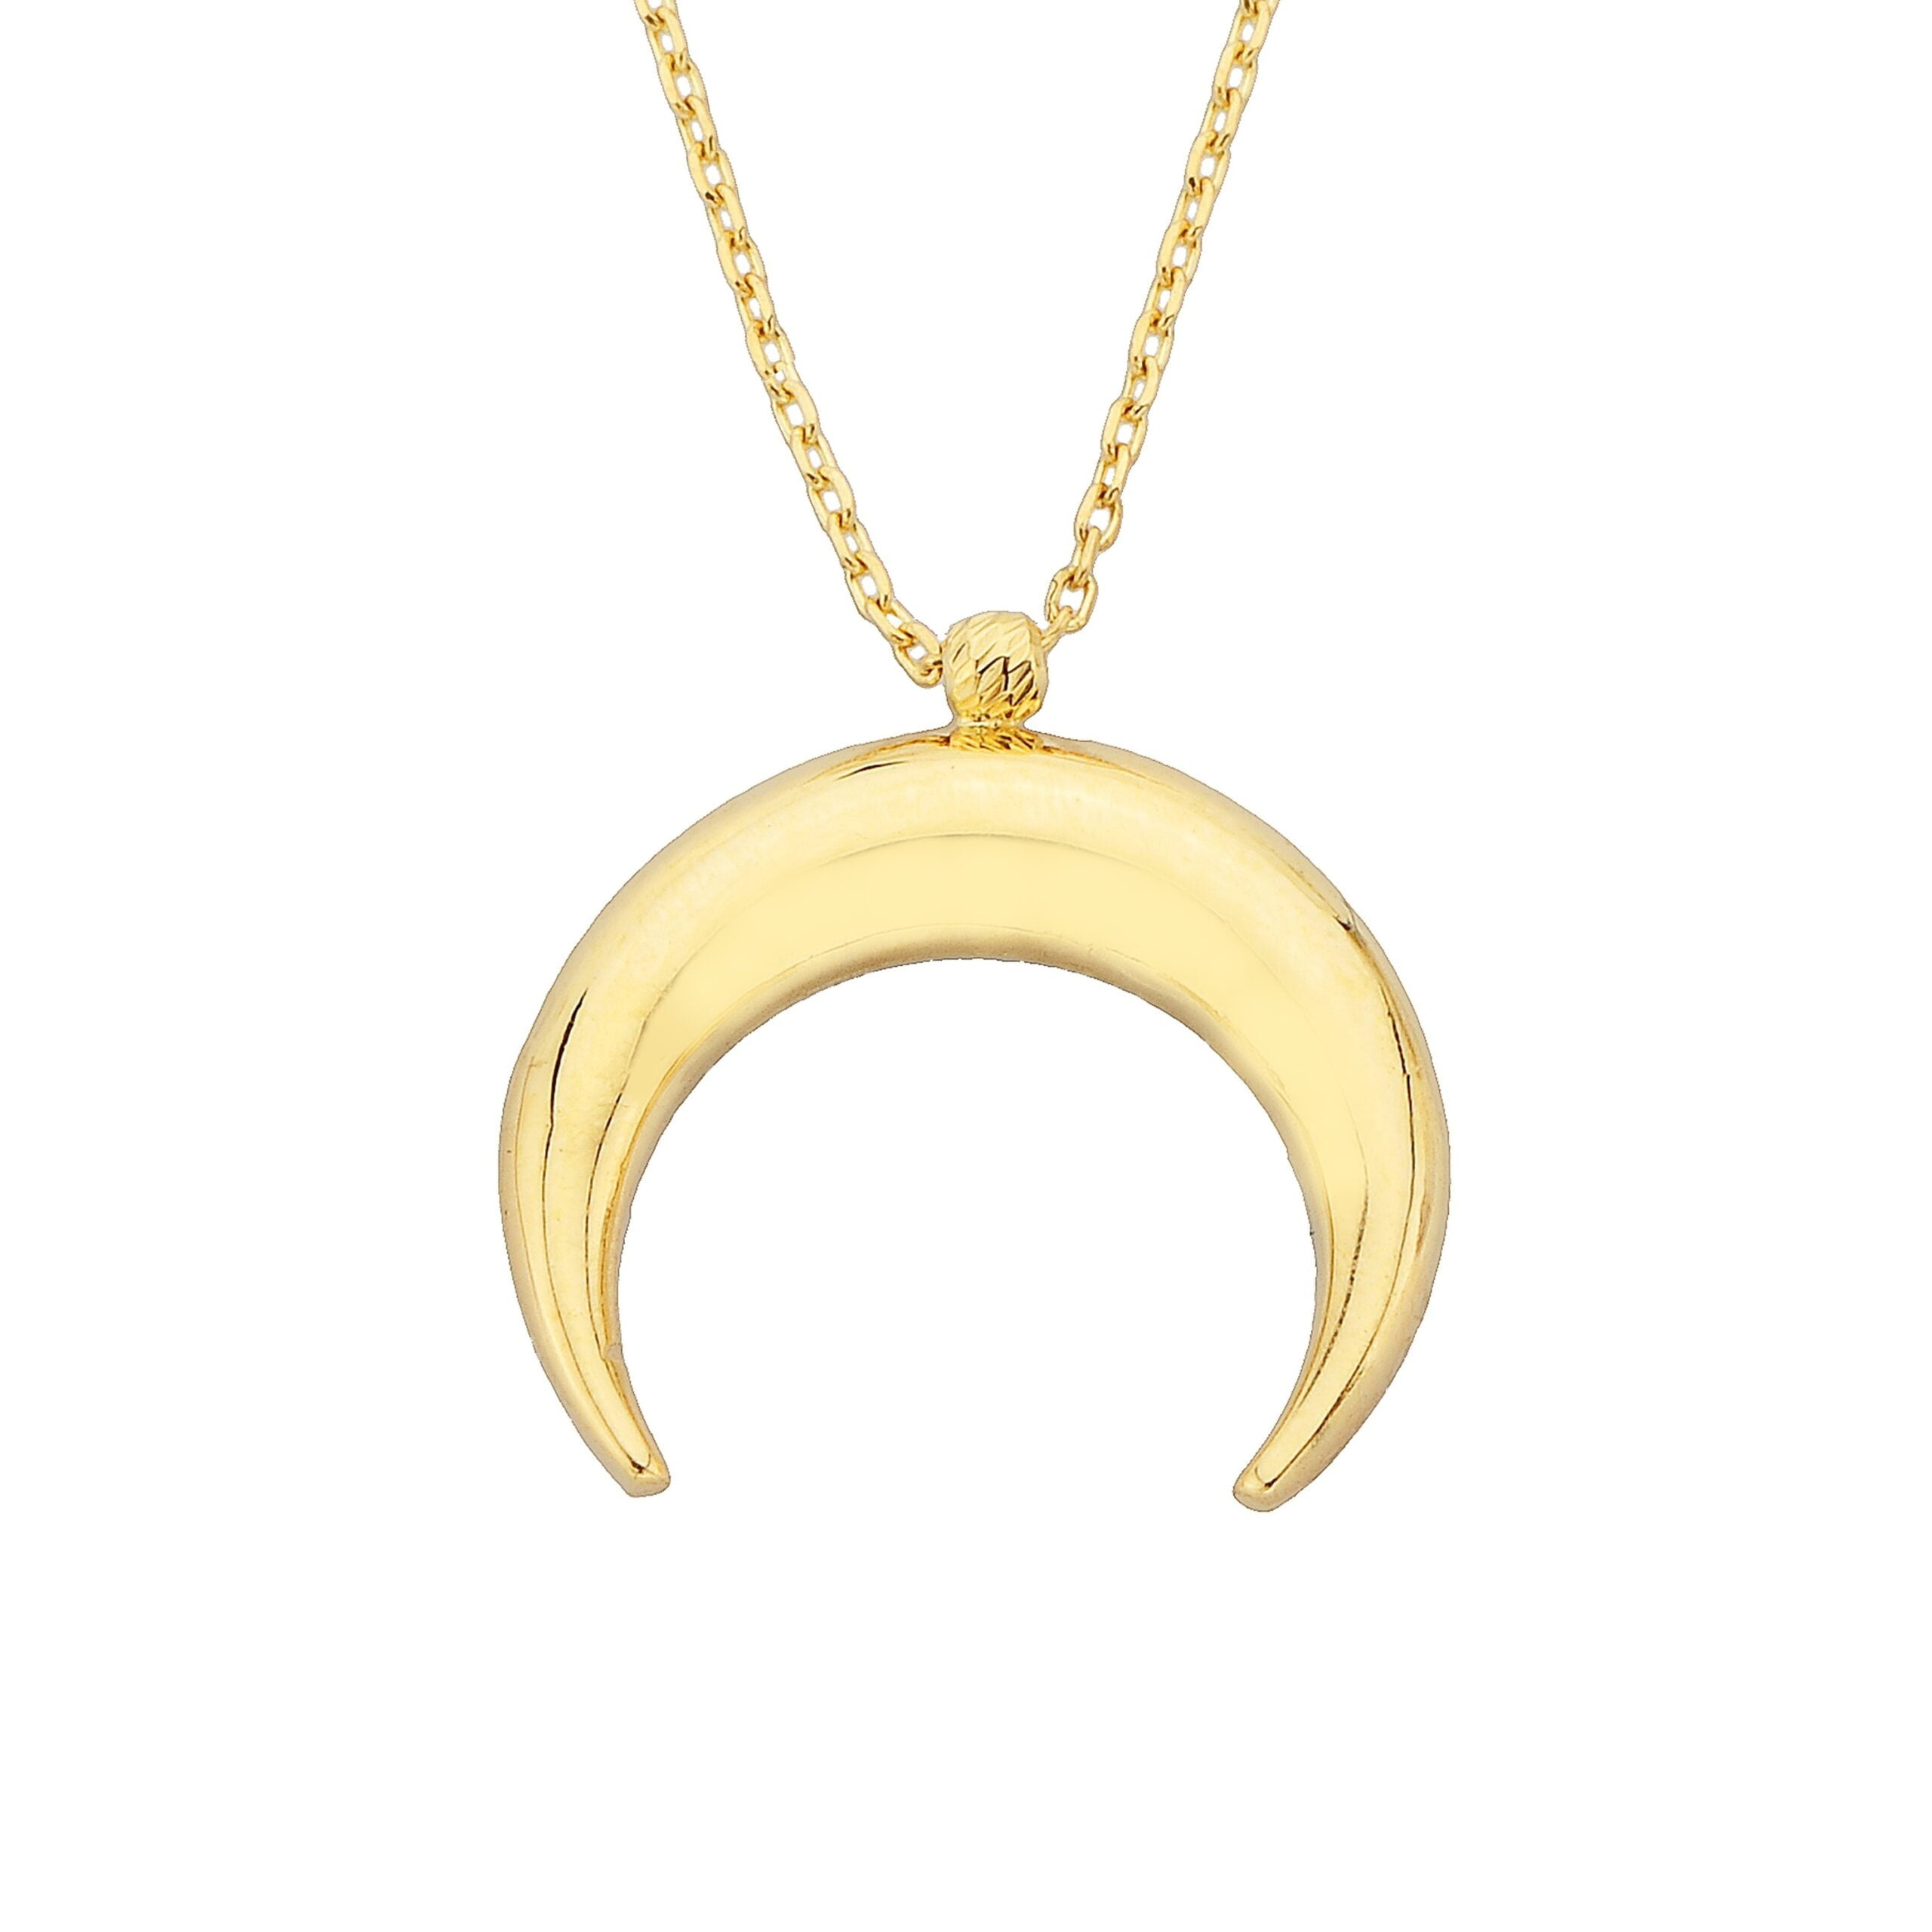 14K Solid Gold Crescent Moon Double Horn Half Phase Pendant Necklace for Women Birthday Gift Christmas xmas mother's day